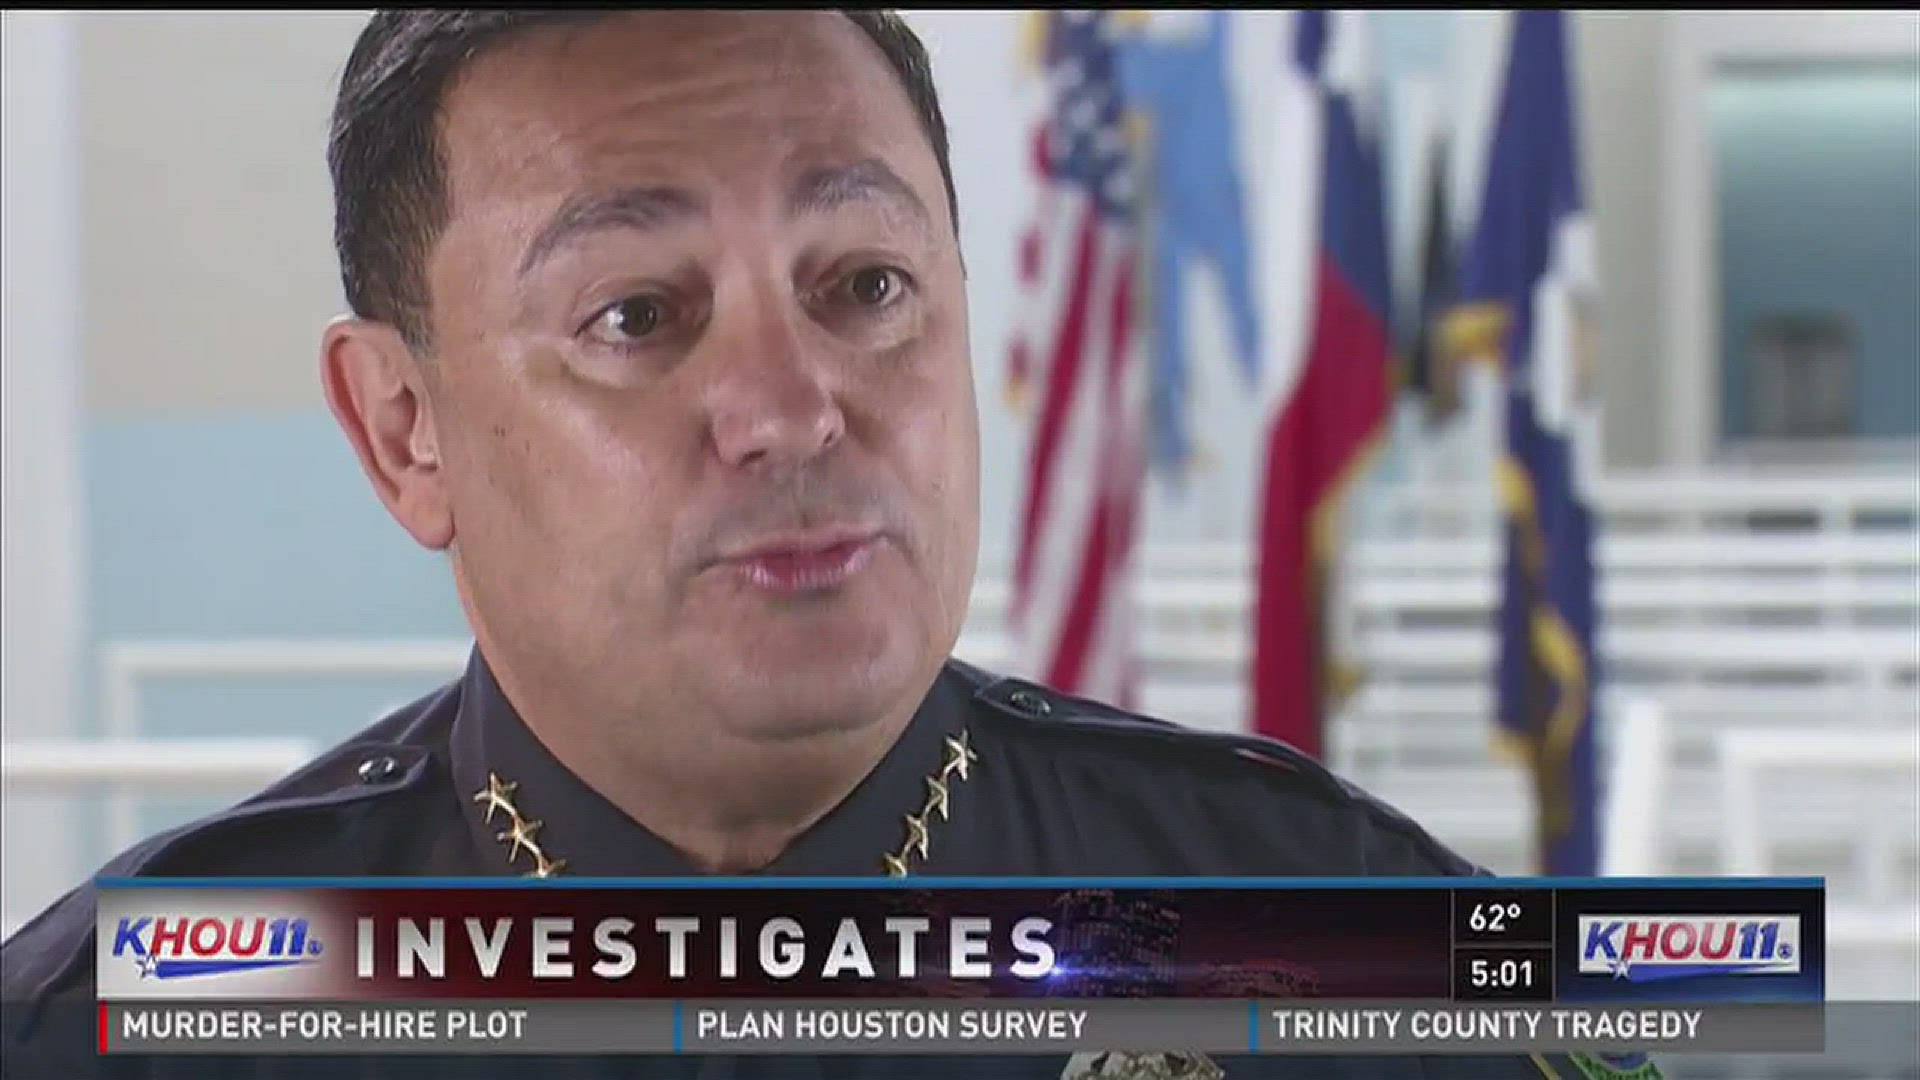 Houston's new Chief of Police Art Acevedo pledged to make some changes to the department's body-camera program after a KHOU investigation revealed it has fallen short of its promises.